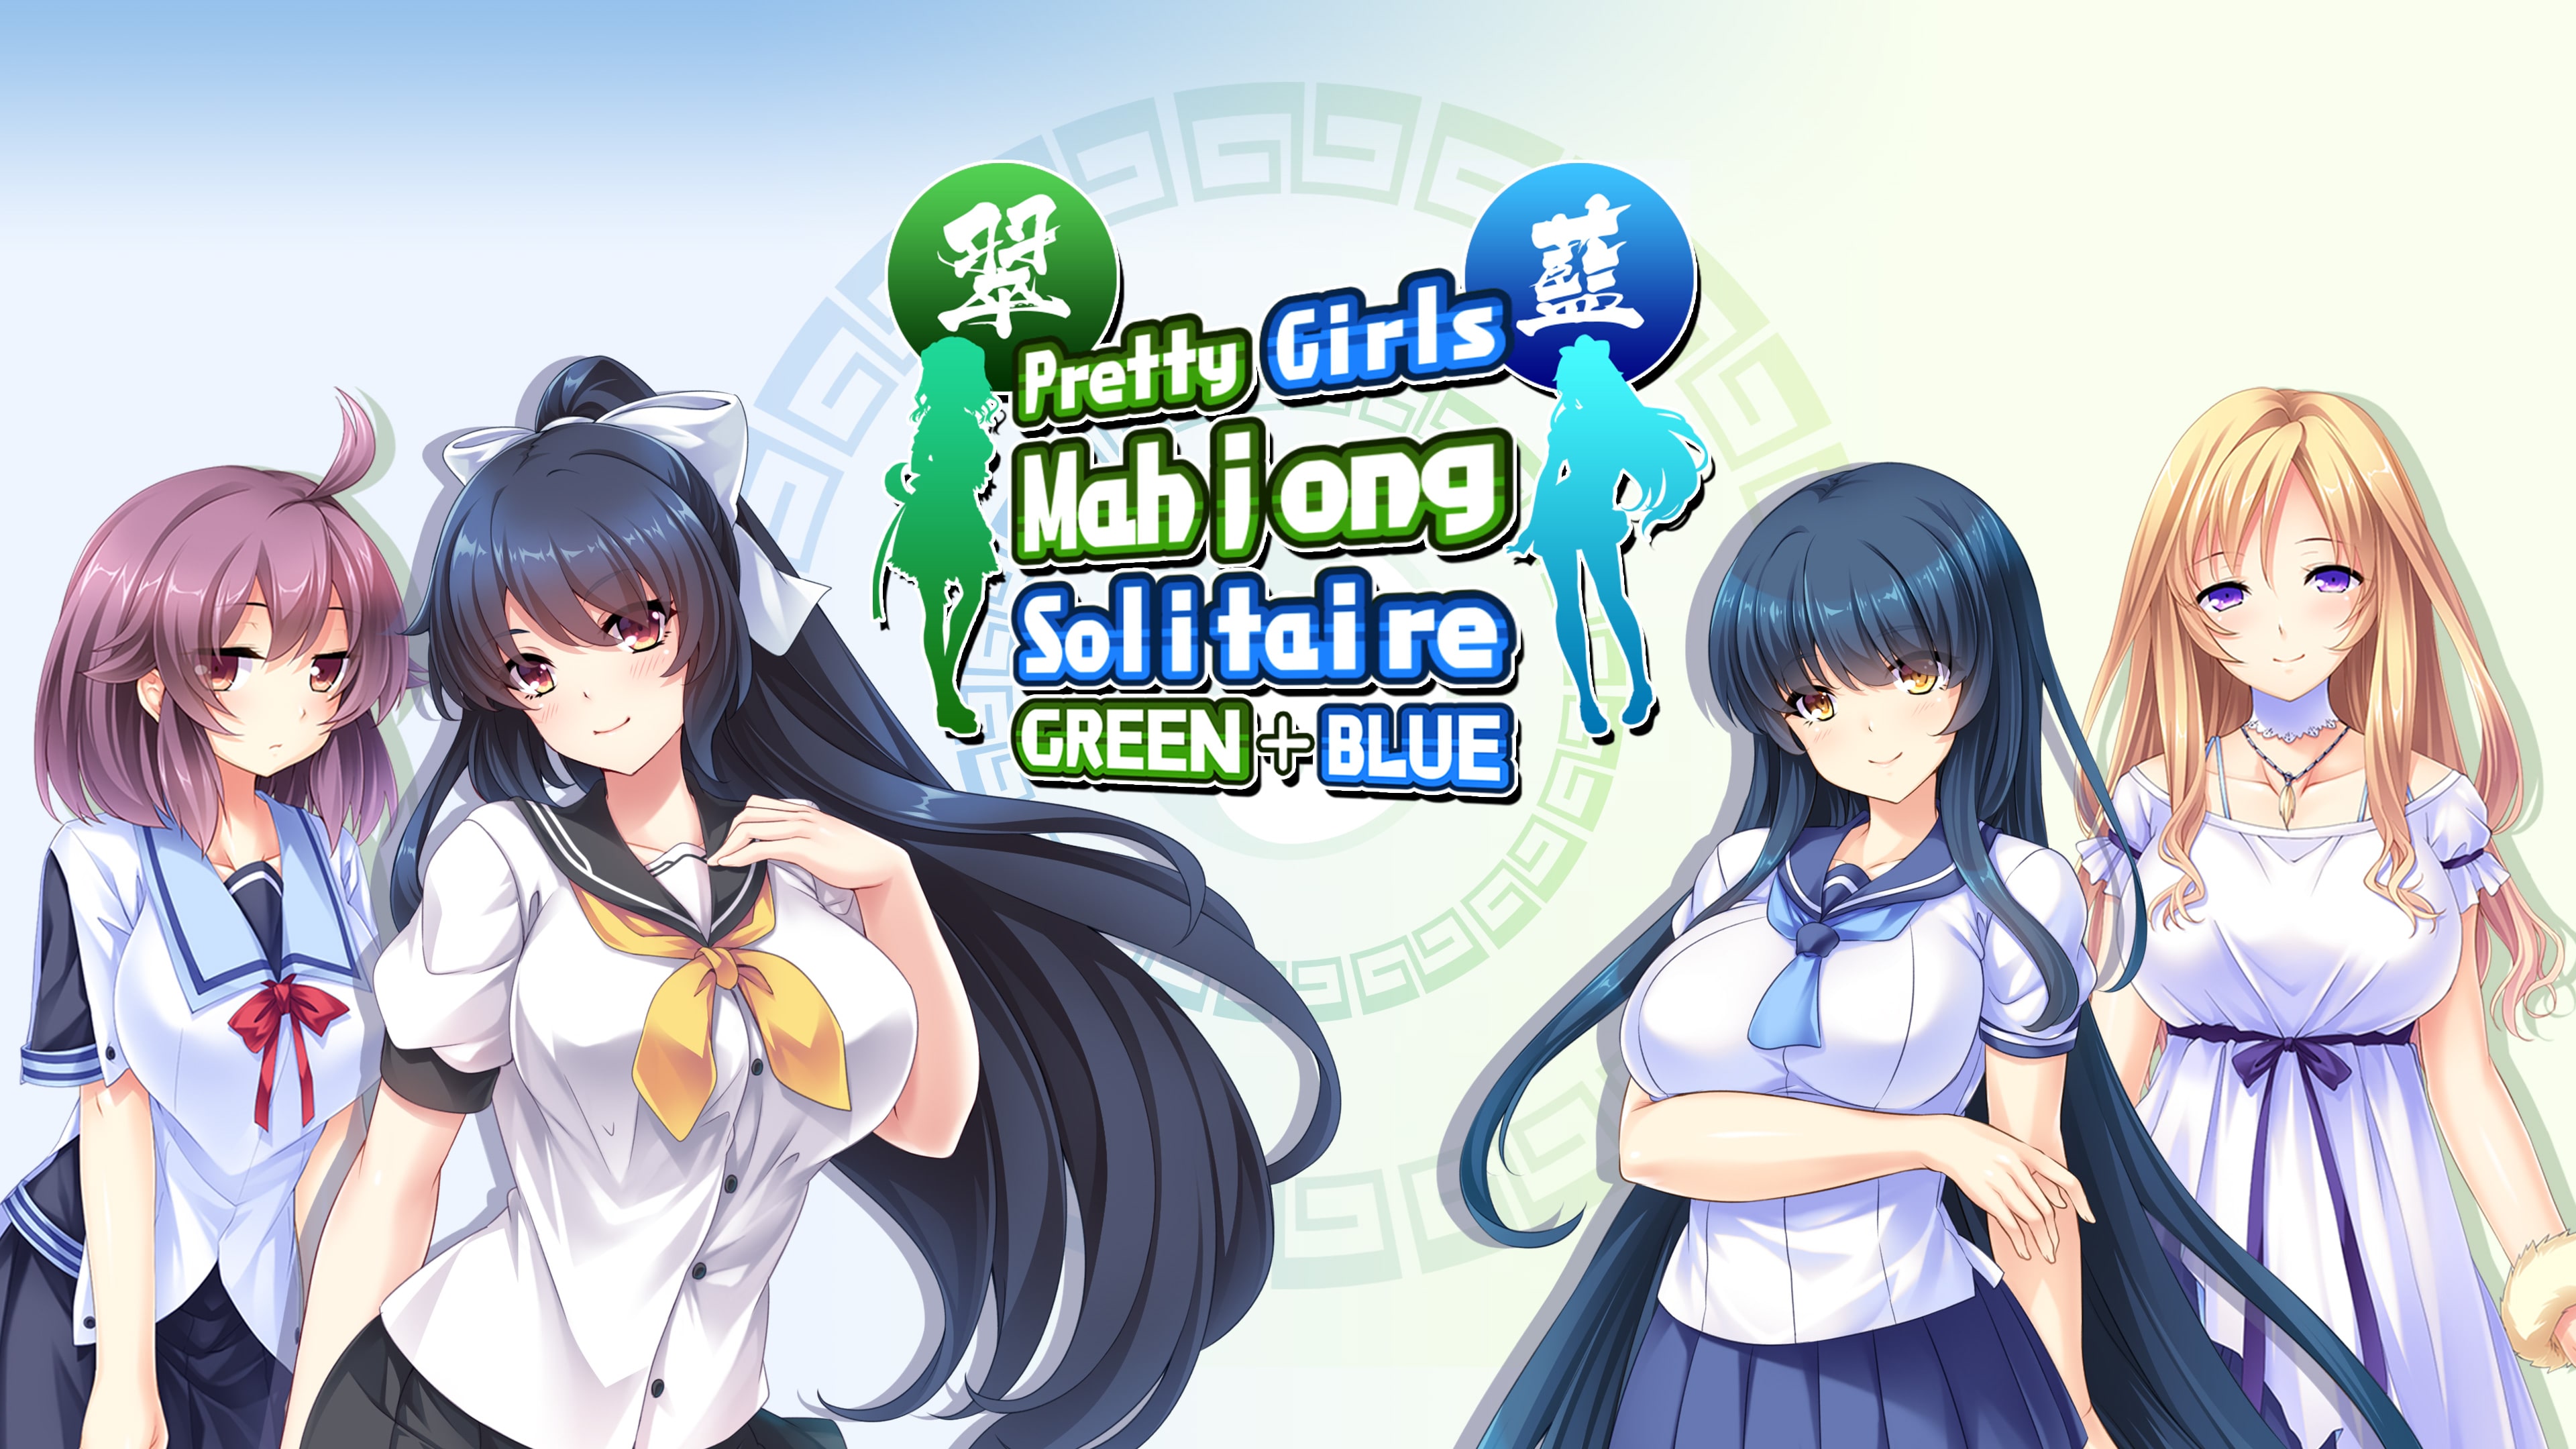 Pretty Girls Mahjong Solitaire Green + Blue Bundle (PS4 & PS5) (Simplified Chinese, English, Japanese, Traditional Chinese)